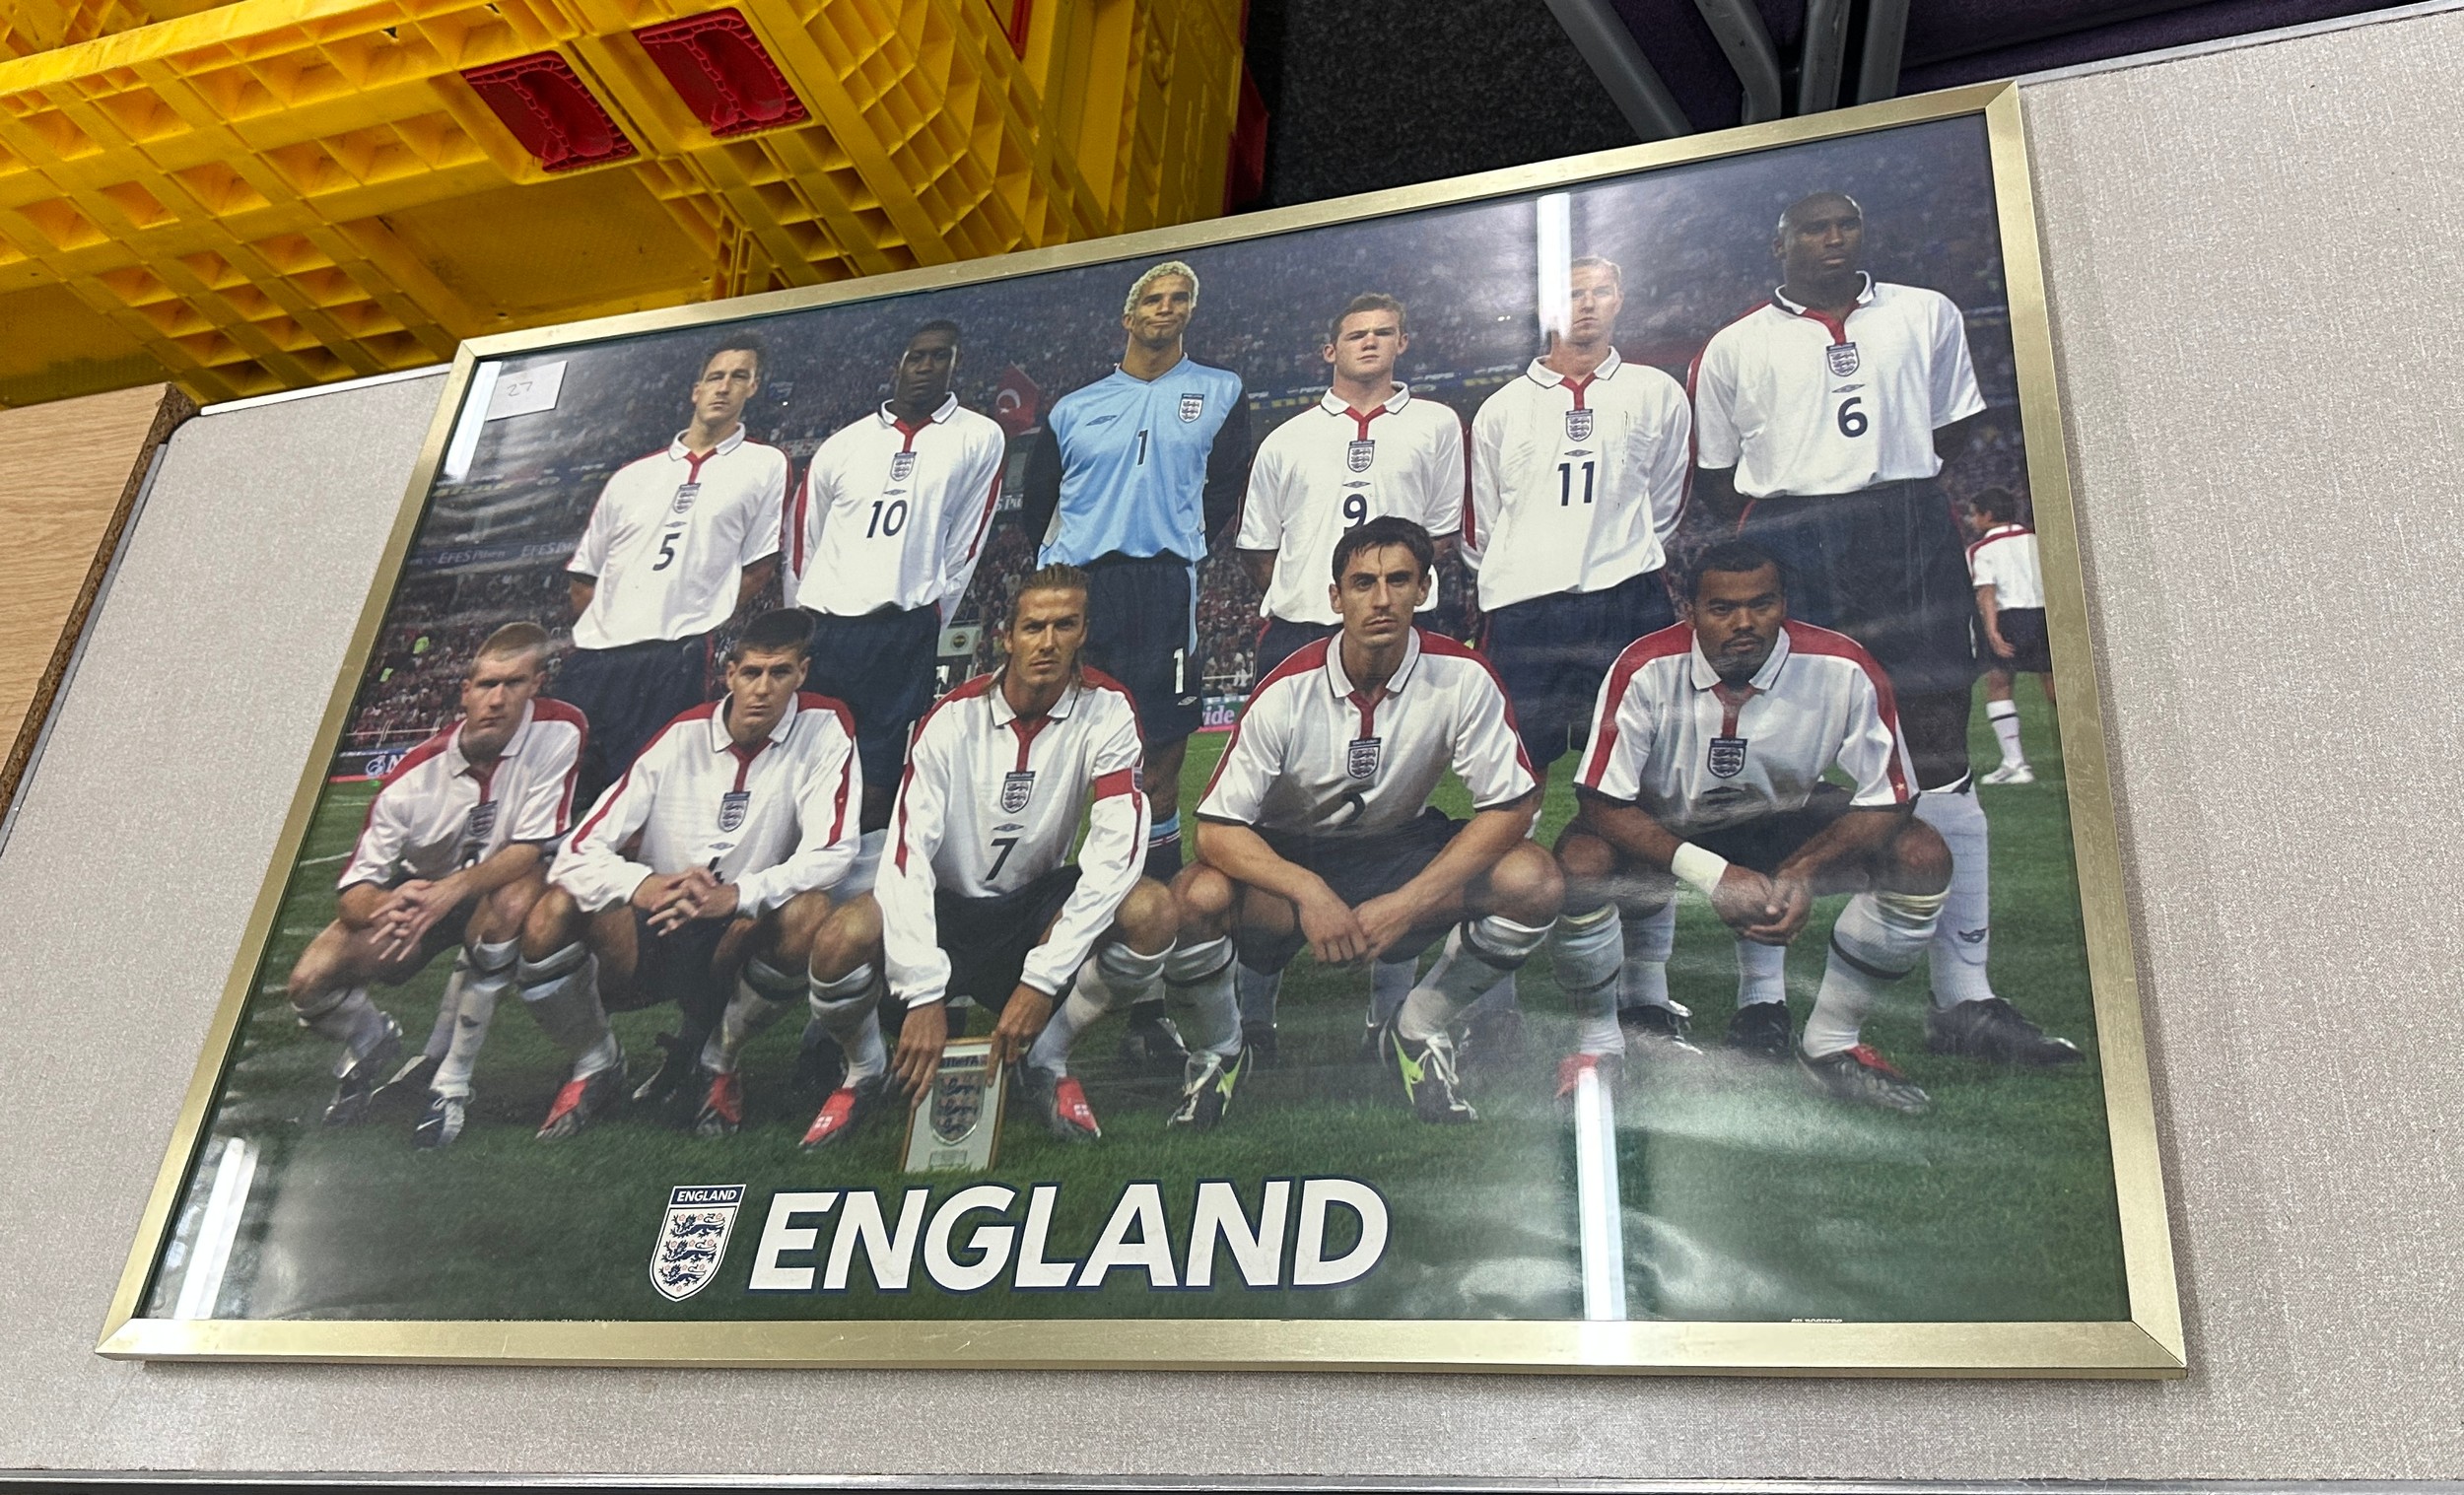 Framed England photo measures approximately 25 x 37 inches - Image 2 of 3